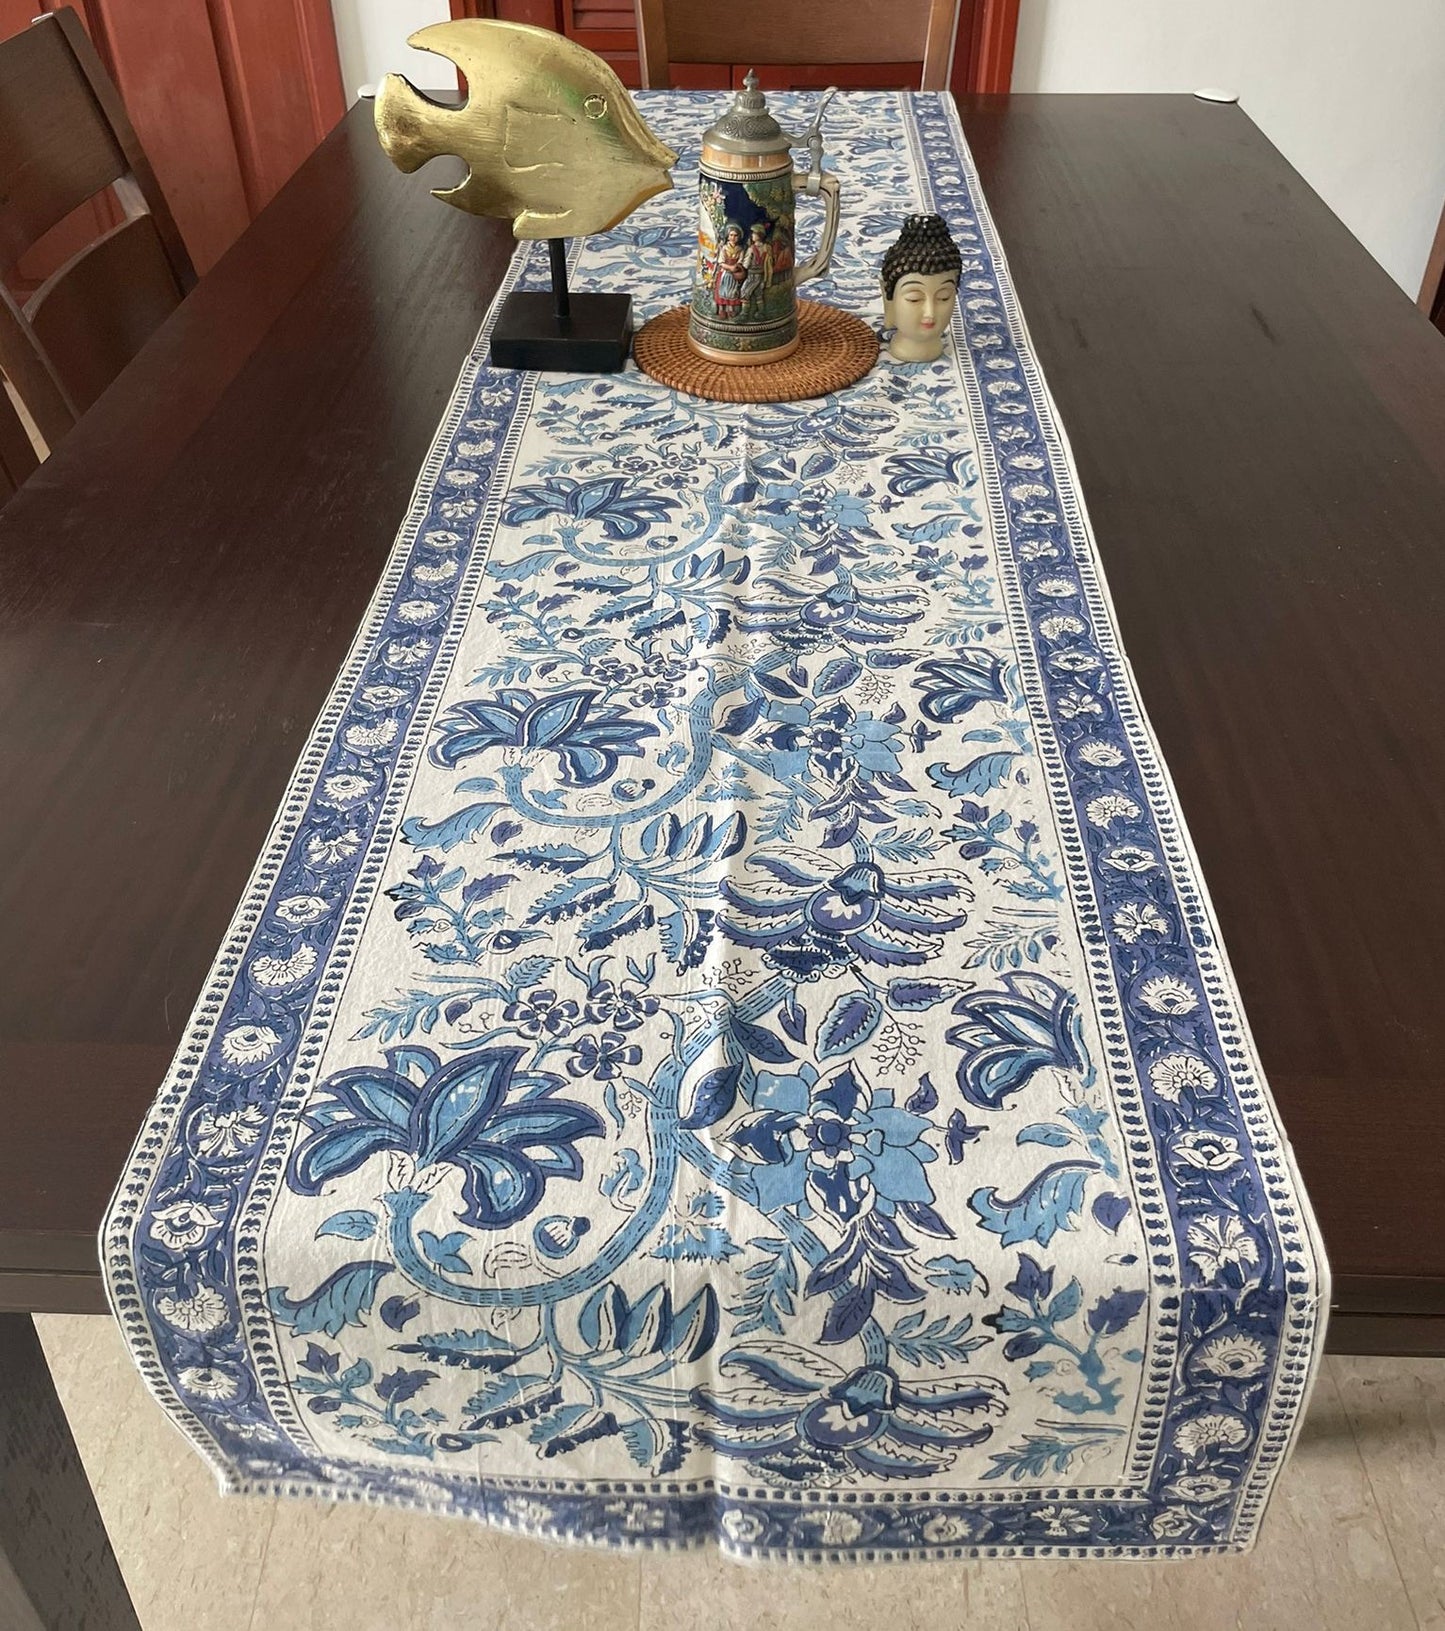 High quality cotton runner for coffee and dining table, shop now in Singapore